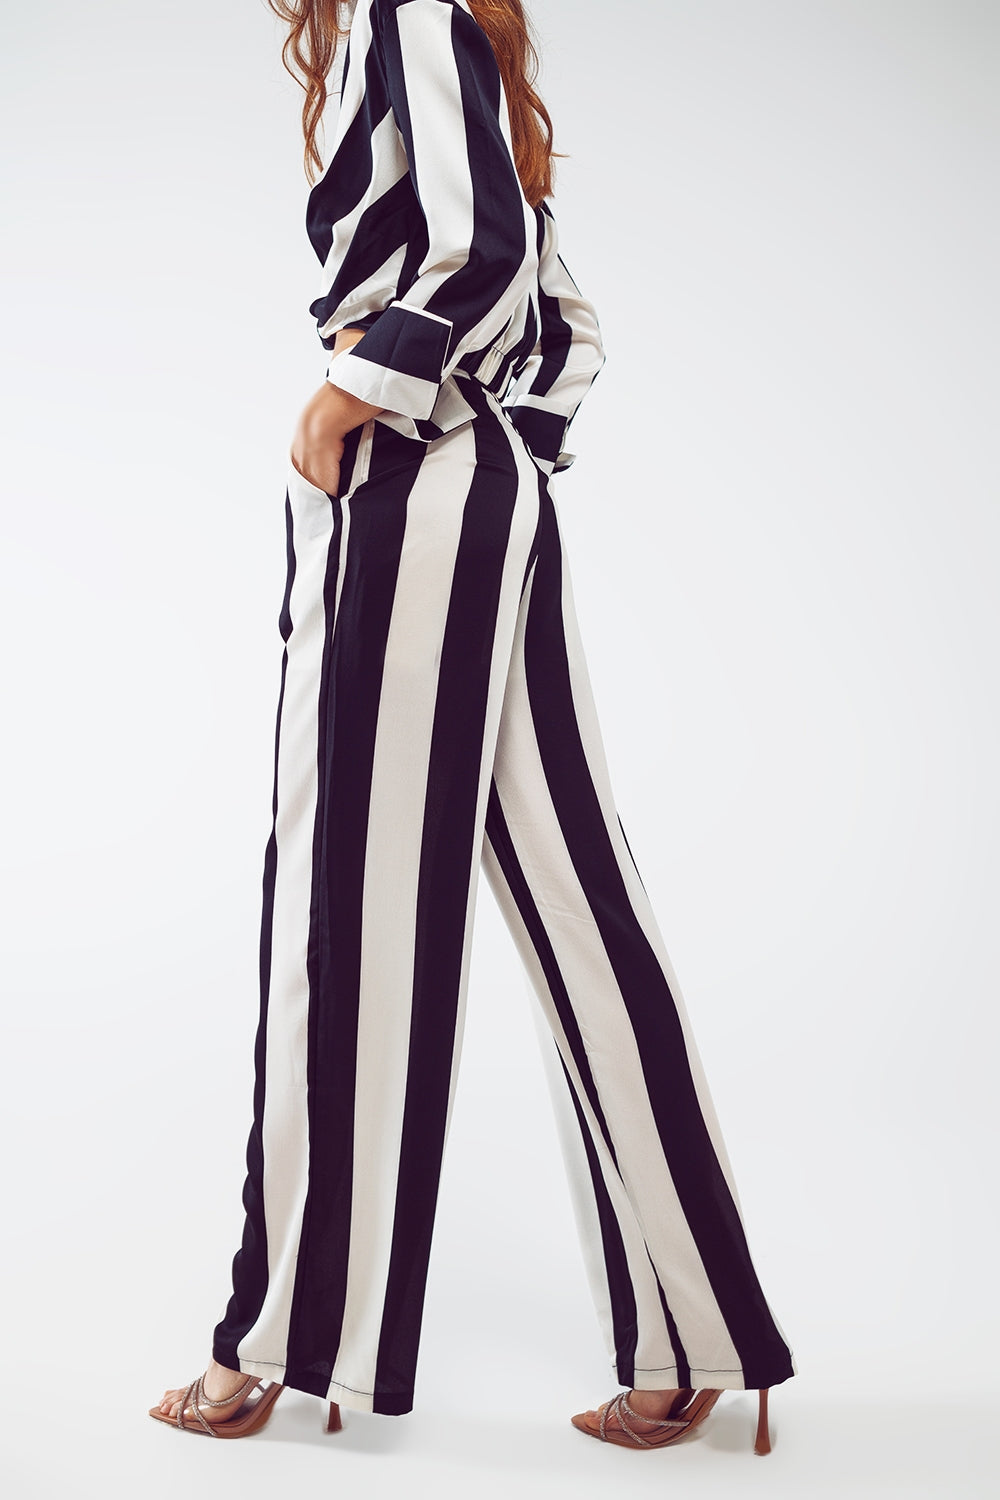 Straight Pants Stripe design and Relaxed fit in Black and White - Szua Store